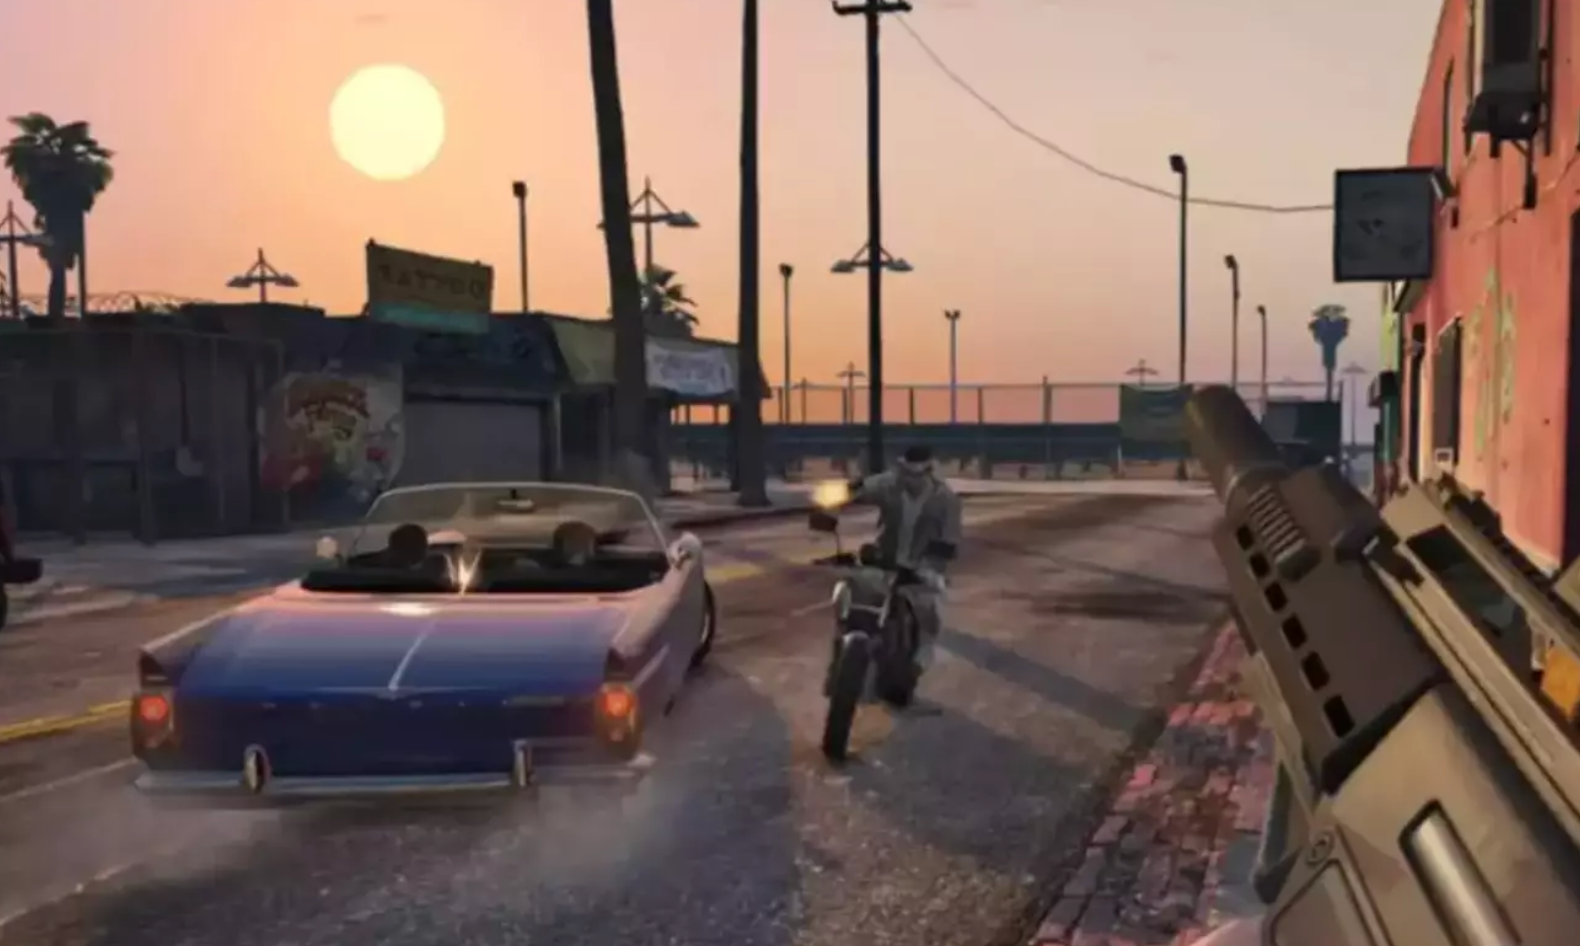 GTA 6 gameplay feature confirms fans wishes